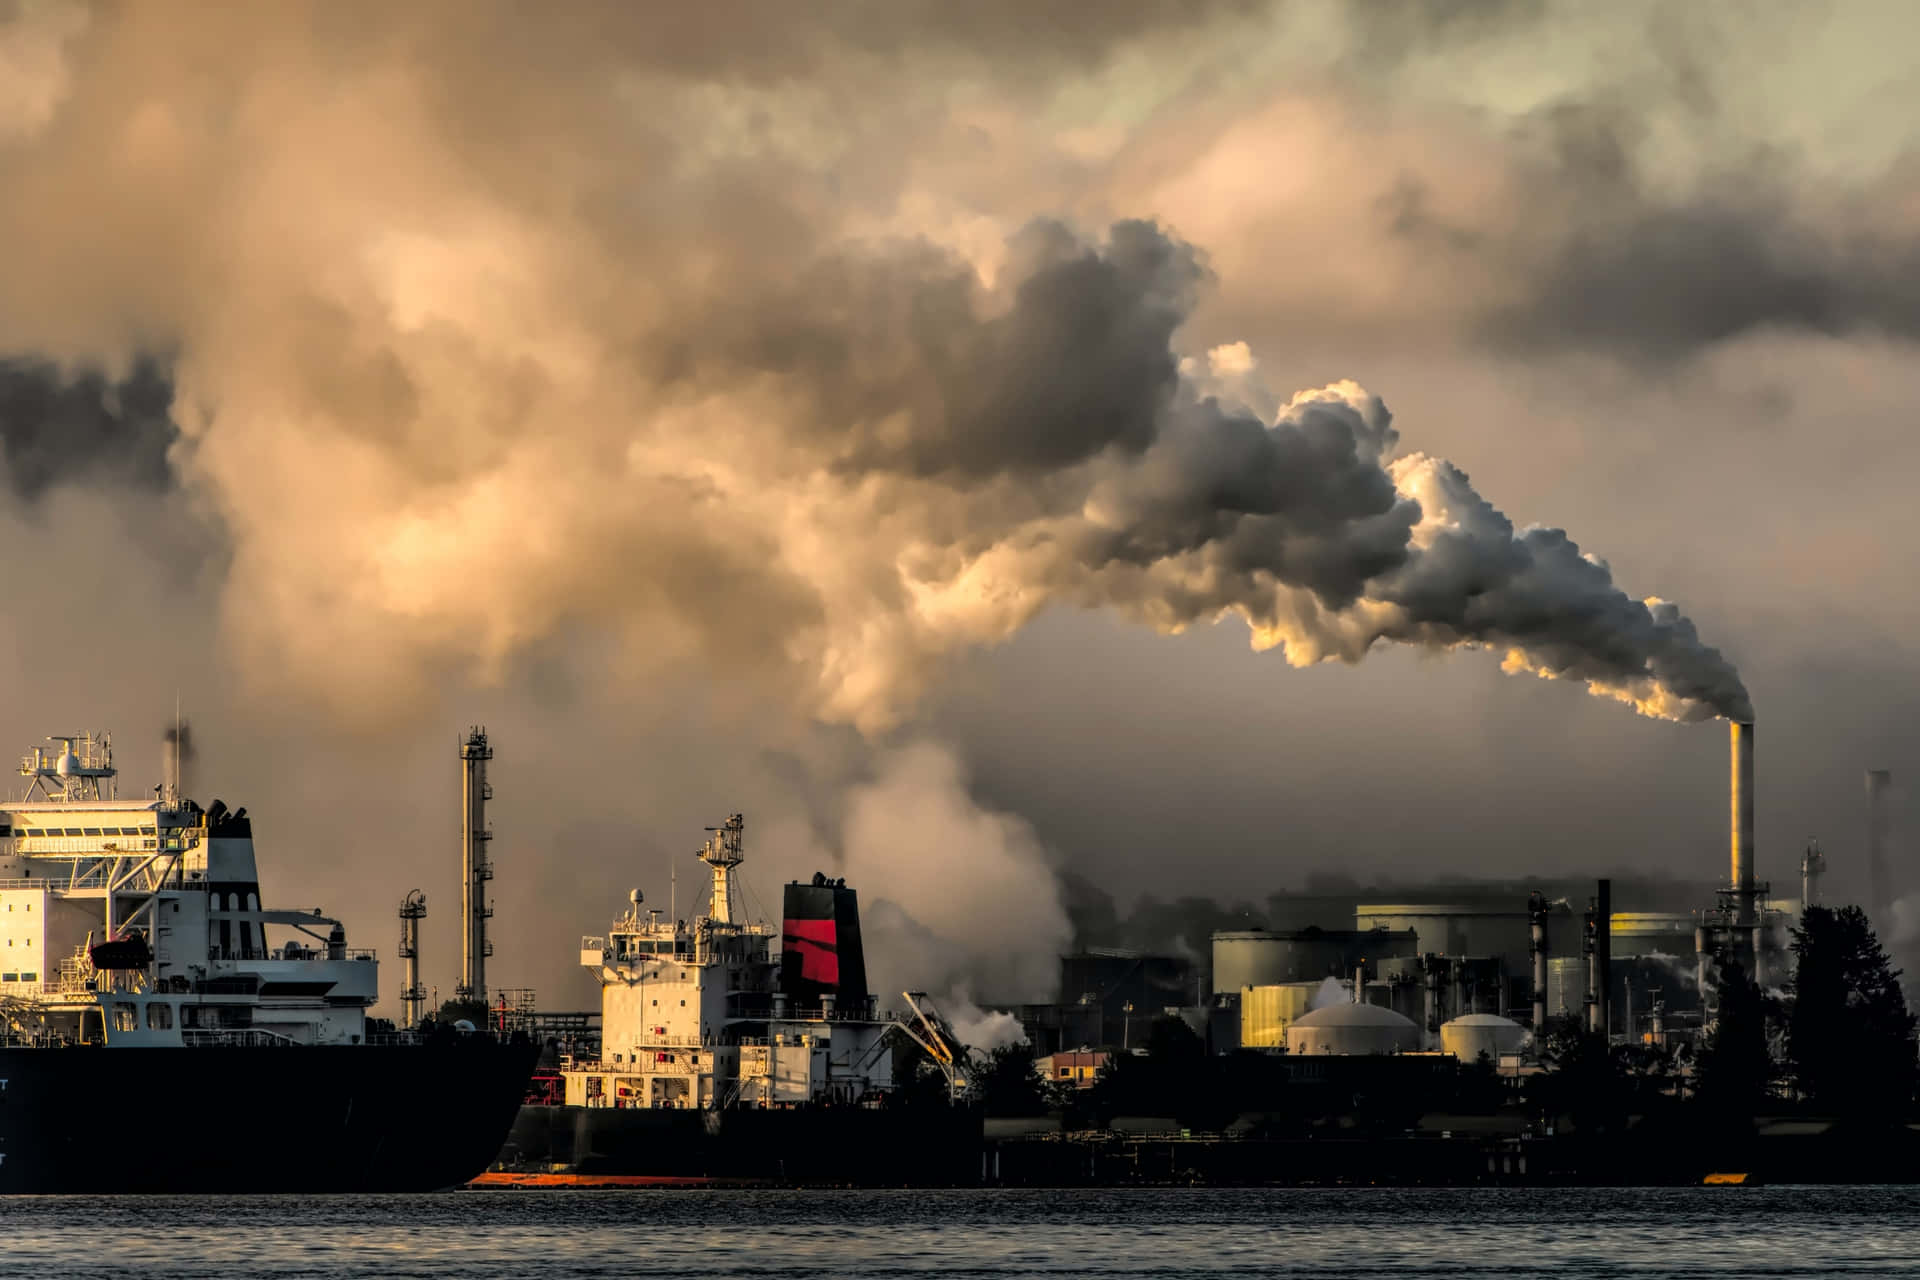 Polluting The Air: The Impact of Human Activity on The Environment